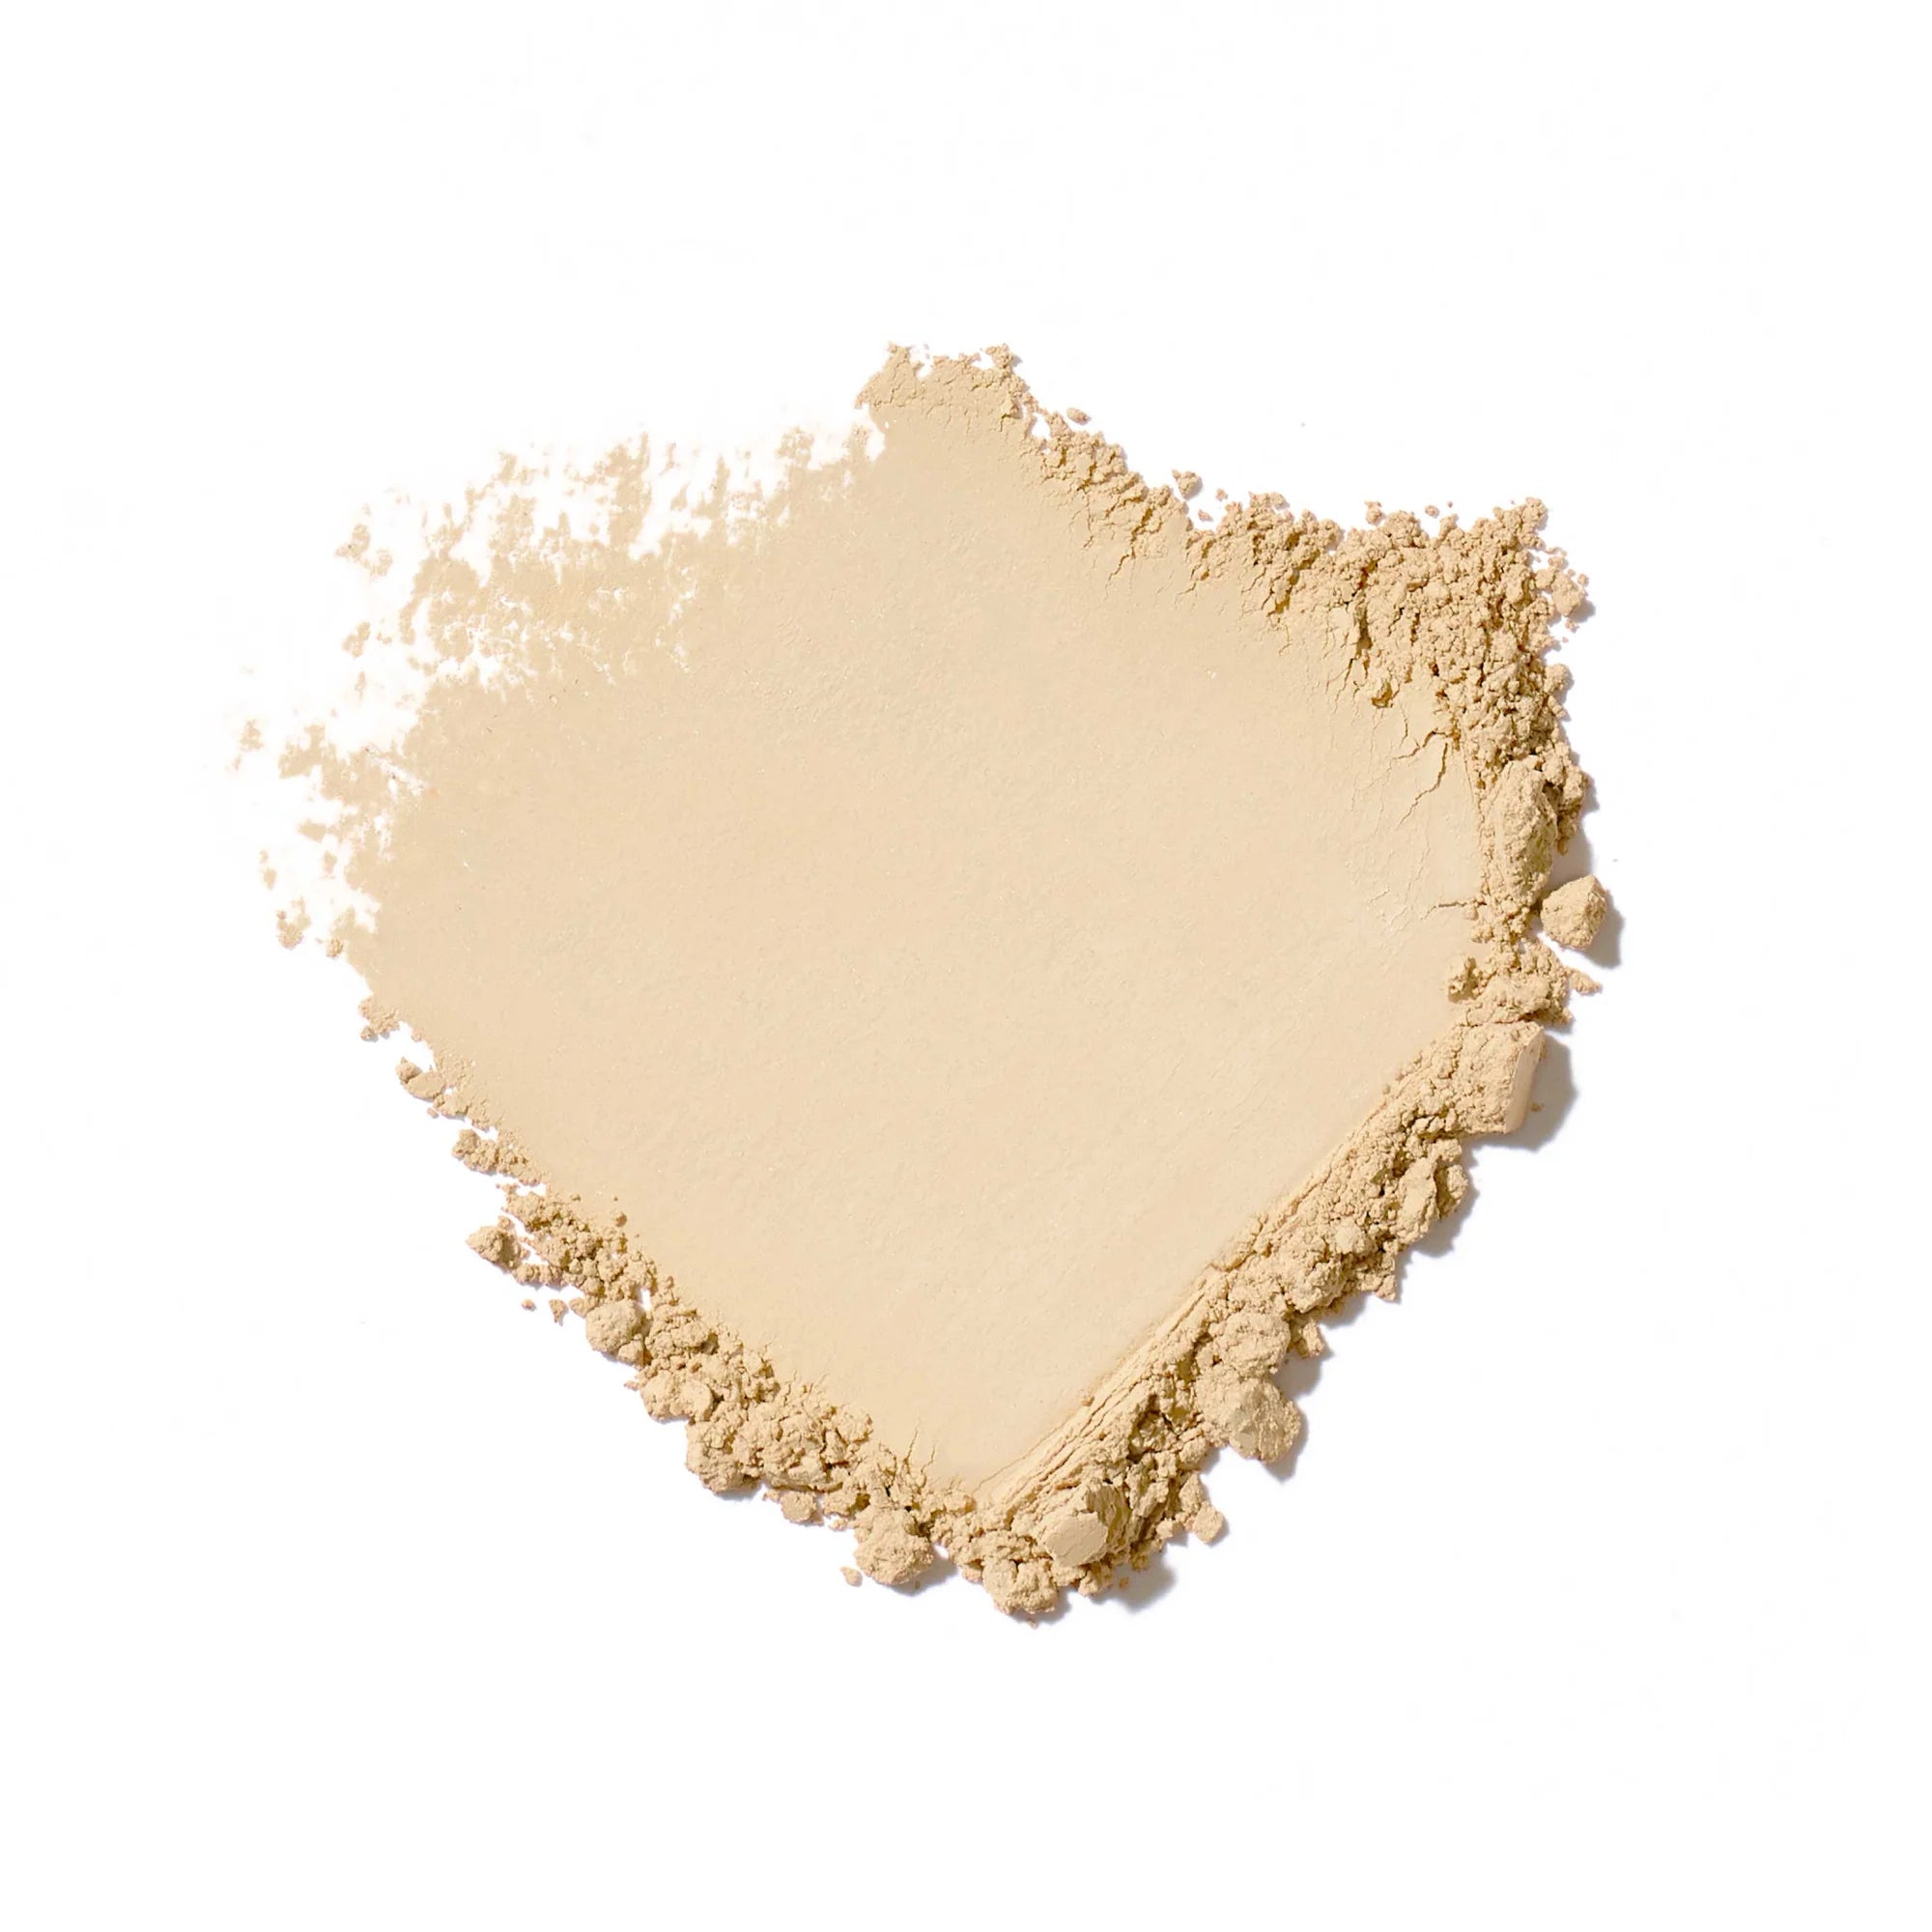 Jane Iredale's Amazing Base® Loose Mineral Powder Refill Brush - shade Warm Silk - Light with gold undertones